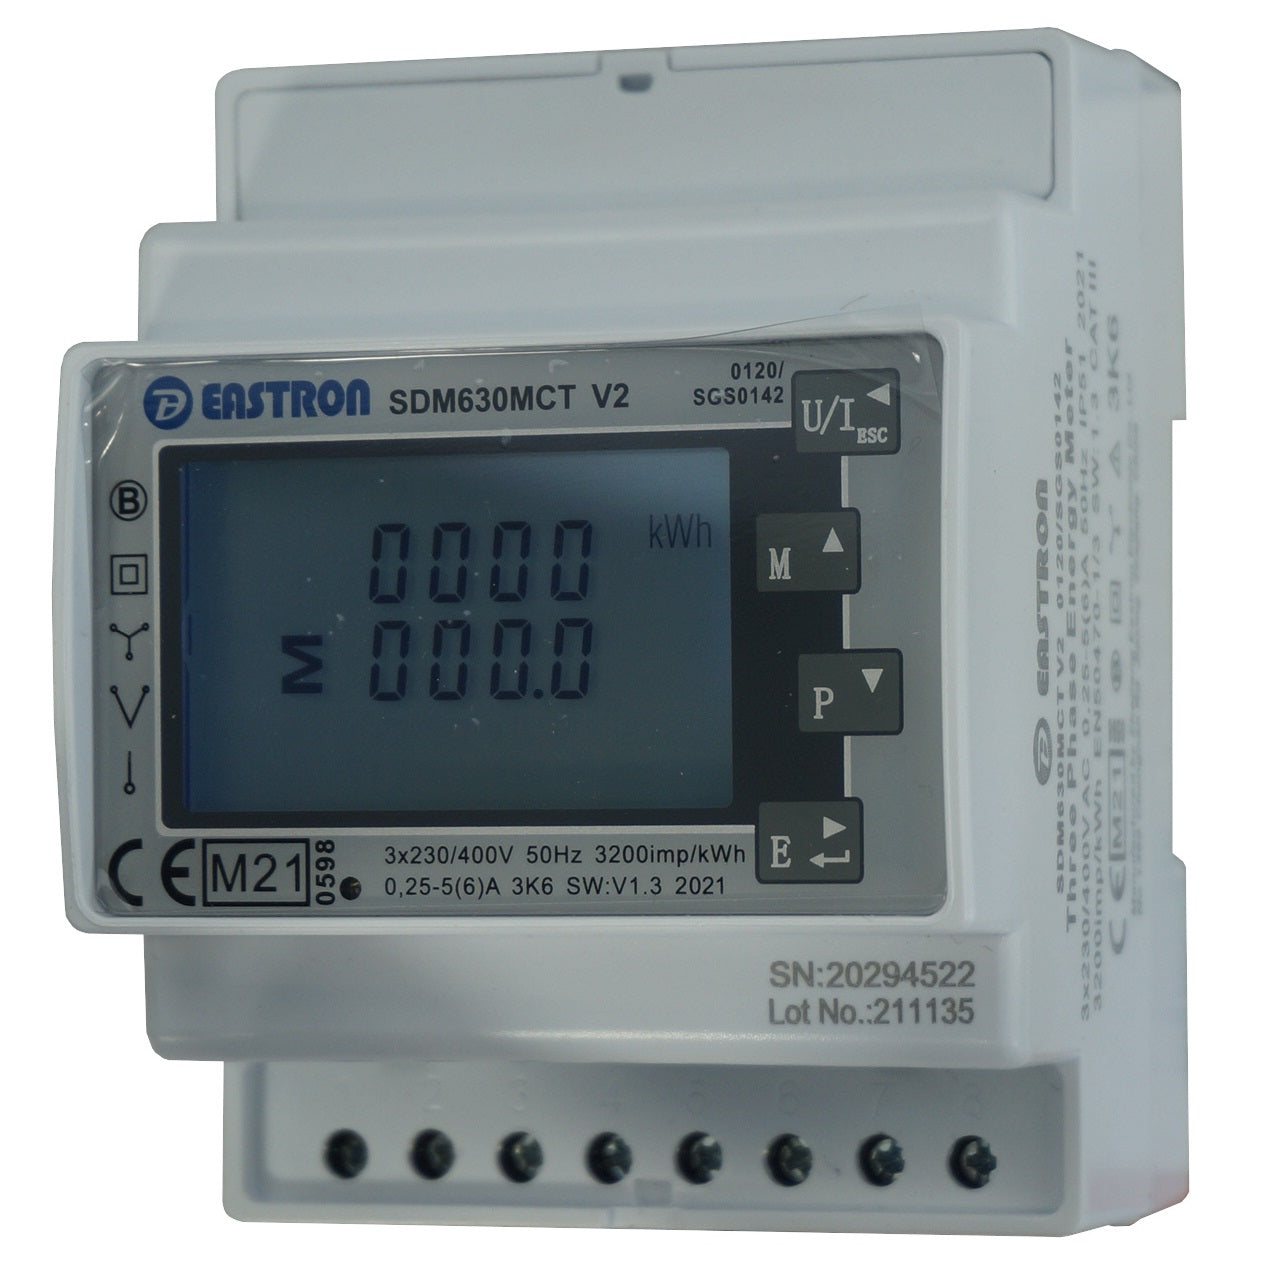 SDM630MCT-MODBUS-MID-CL0.5 V2, DIN Rail Mount kWh Meter, 3 Phase, 240VAC aux, Class 0.5S, 1/5Amp Connect, w/ 2 x pulse outputs and RS485 Modbus RTU Comms, MID Approved